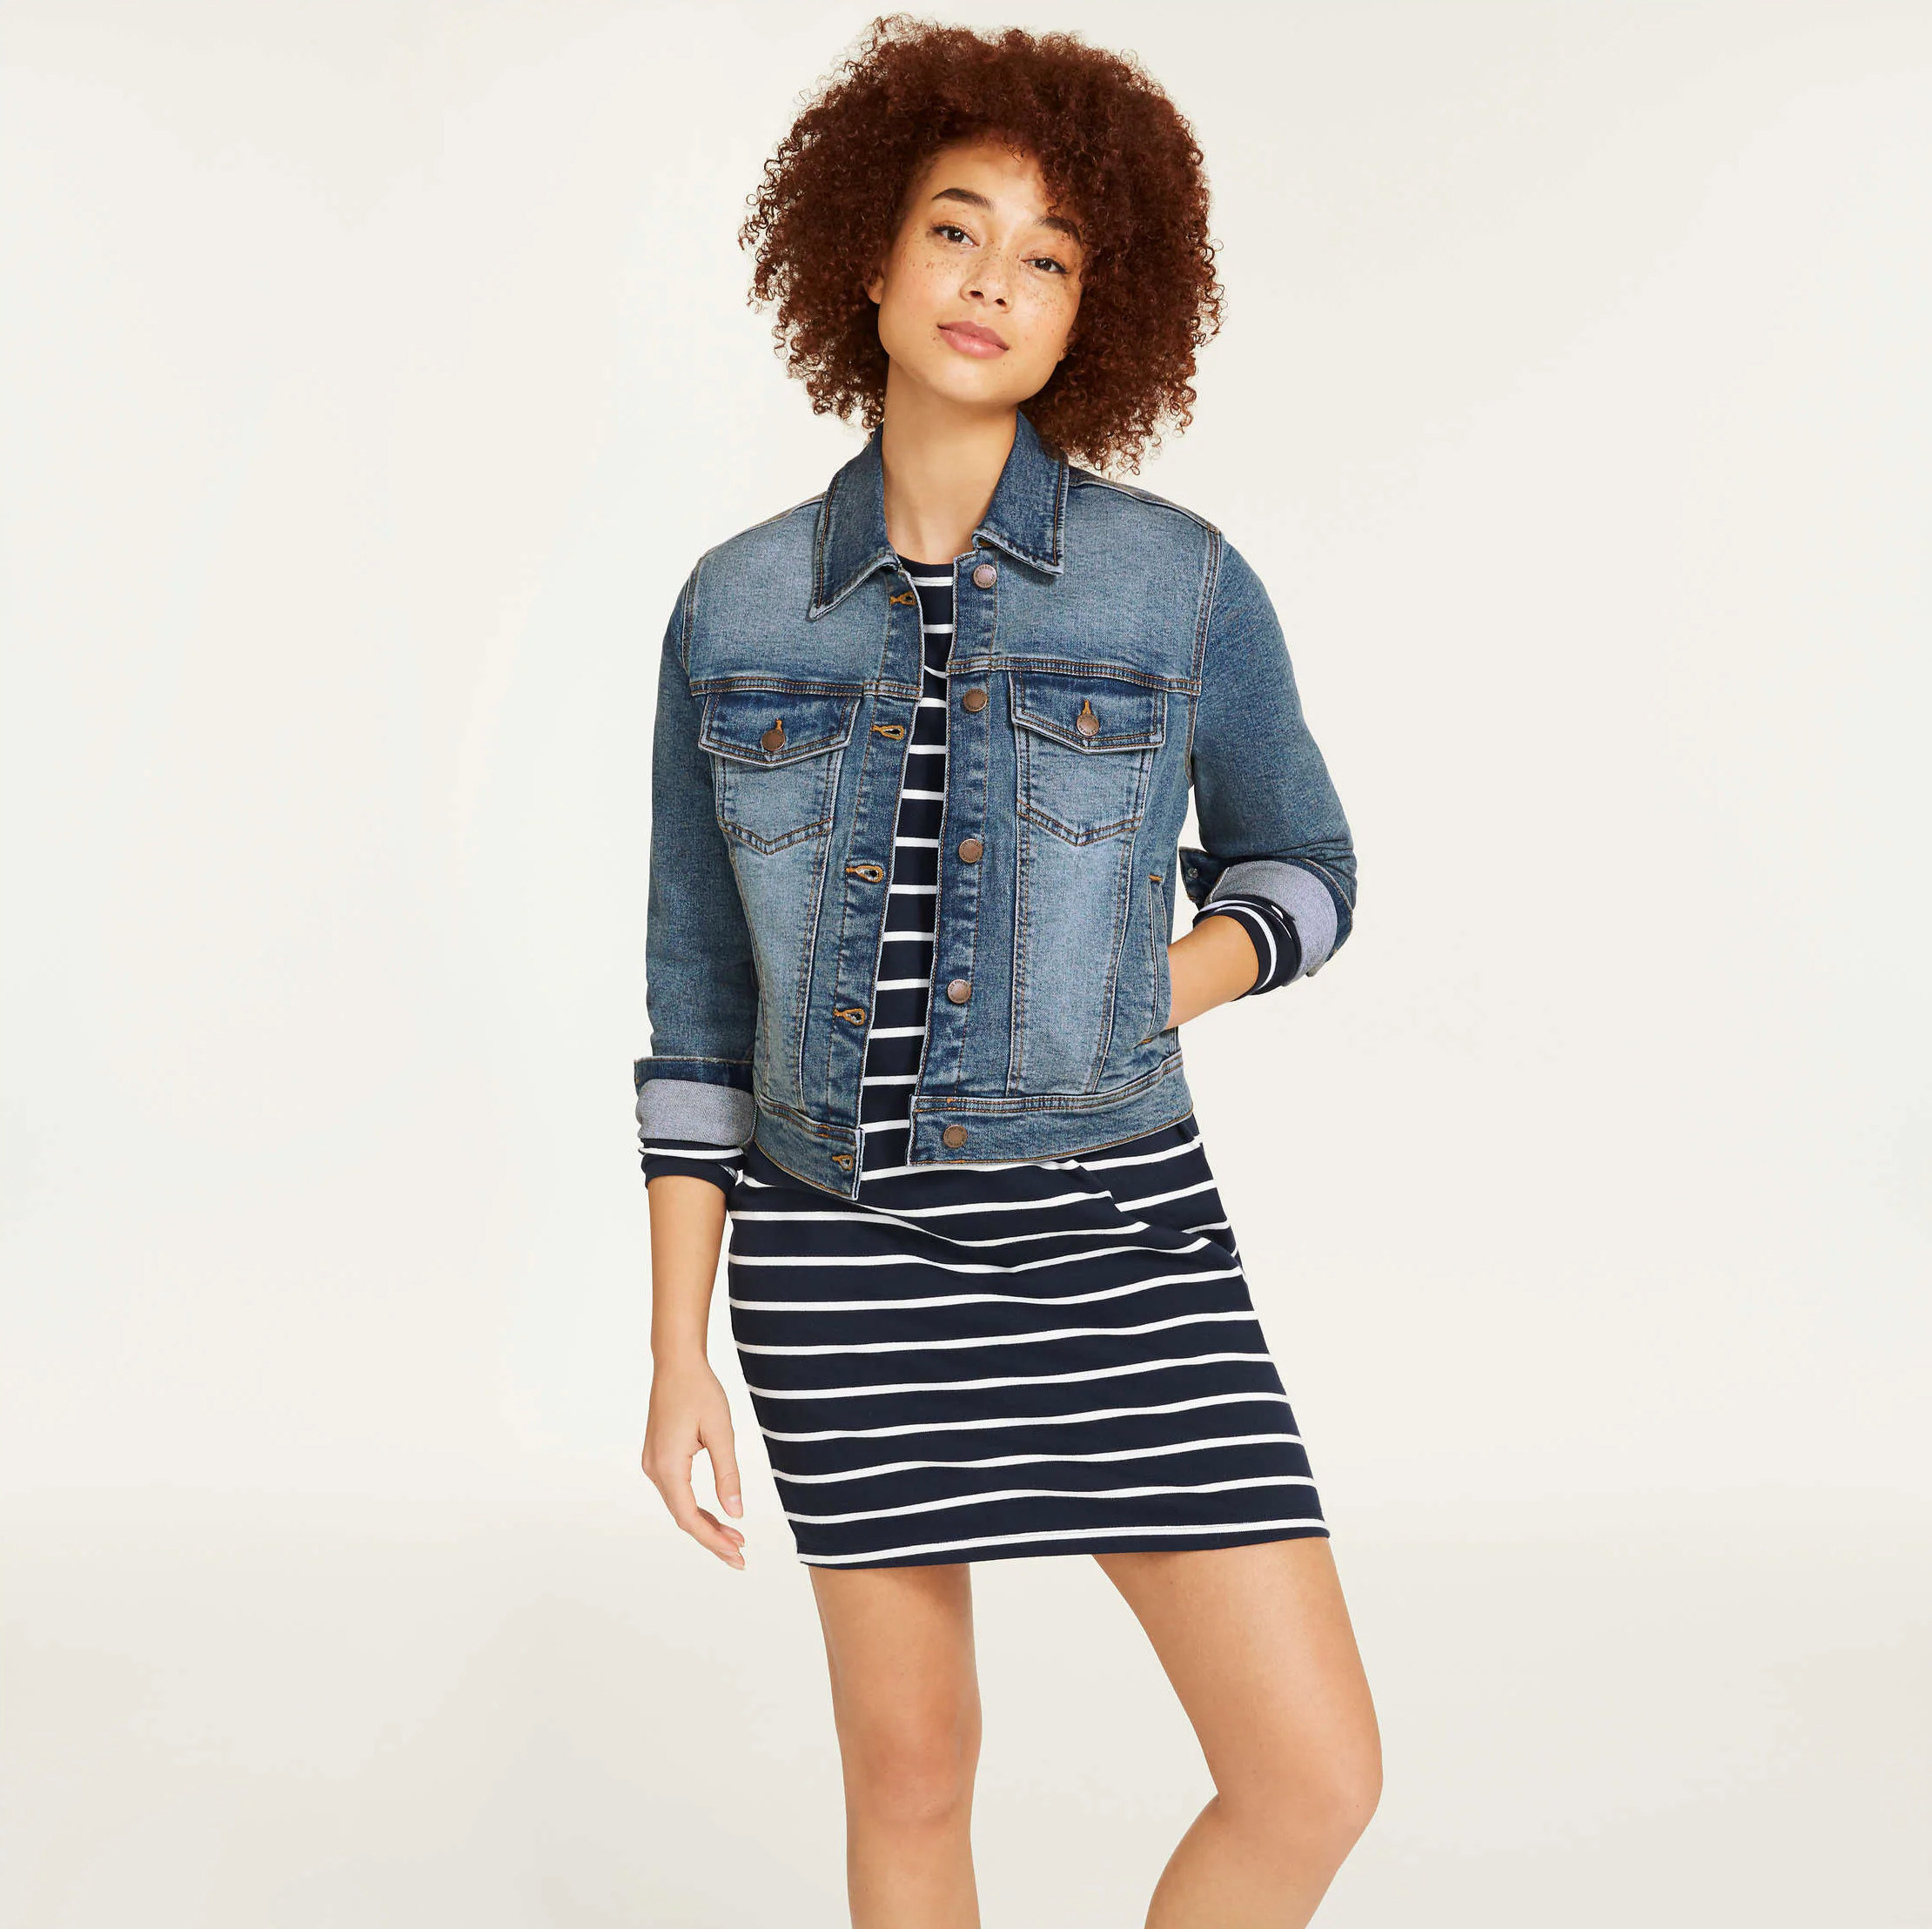 A person wearing a jean jacket over a dress